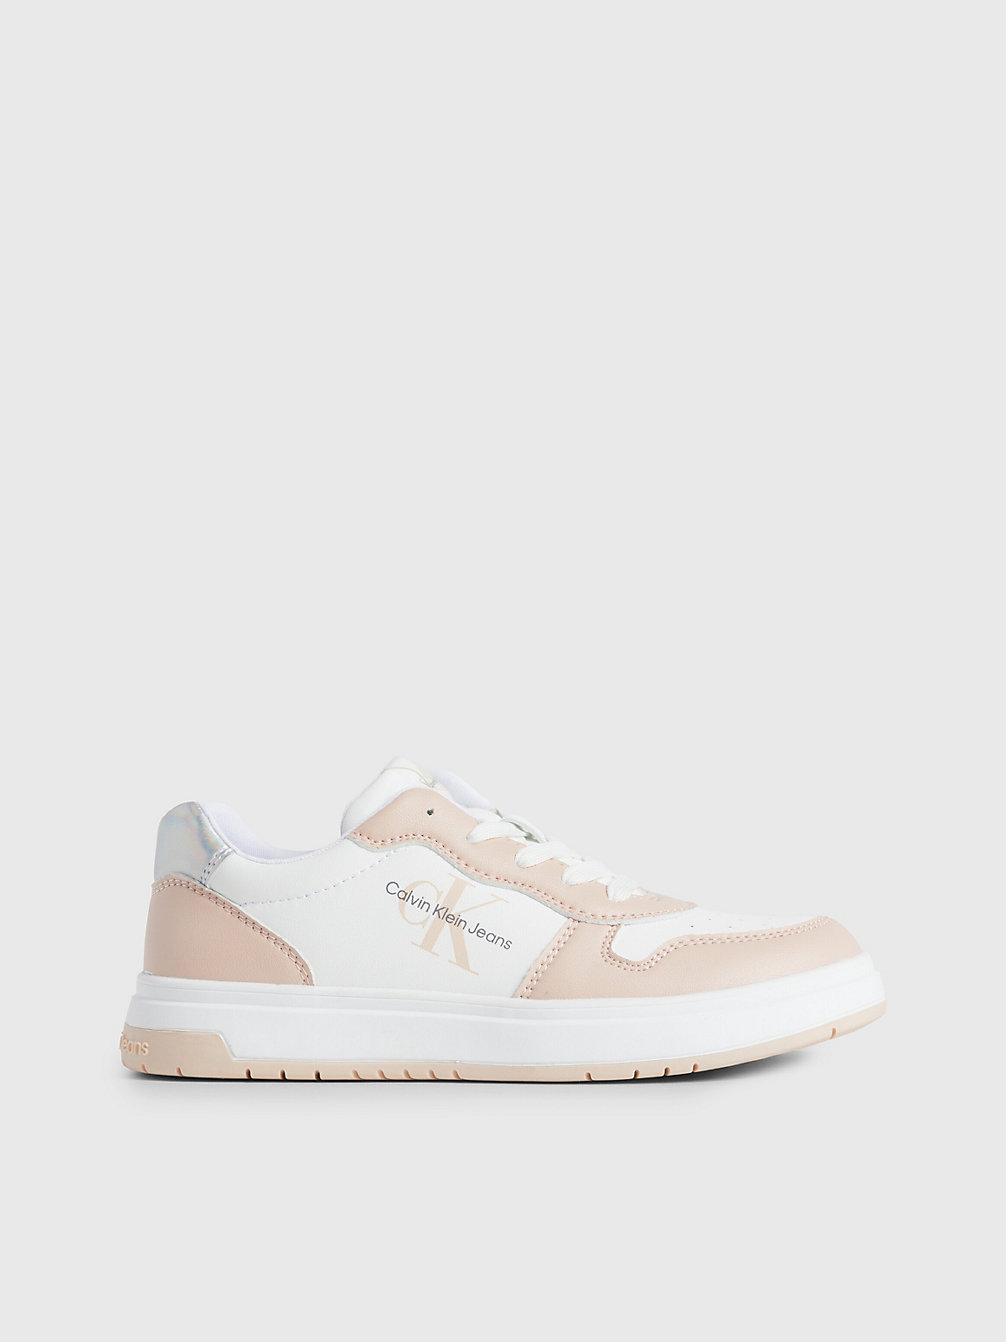 PINK/WHITE Kids Recycled Trainers undefined girls Calvin Klein